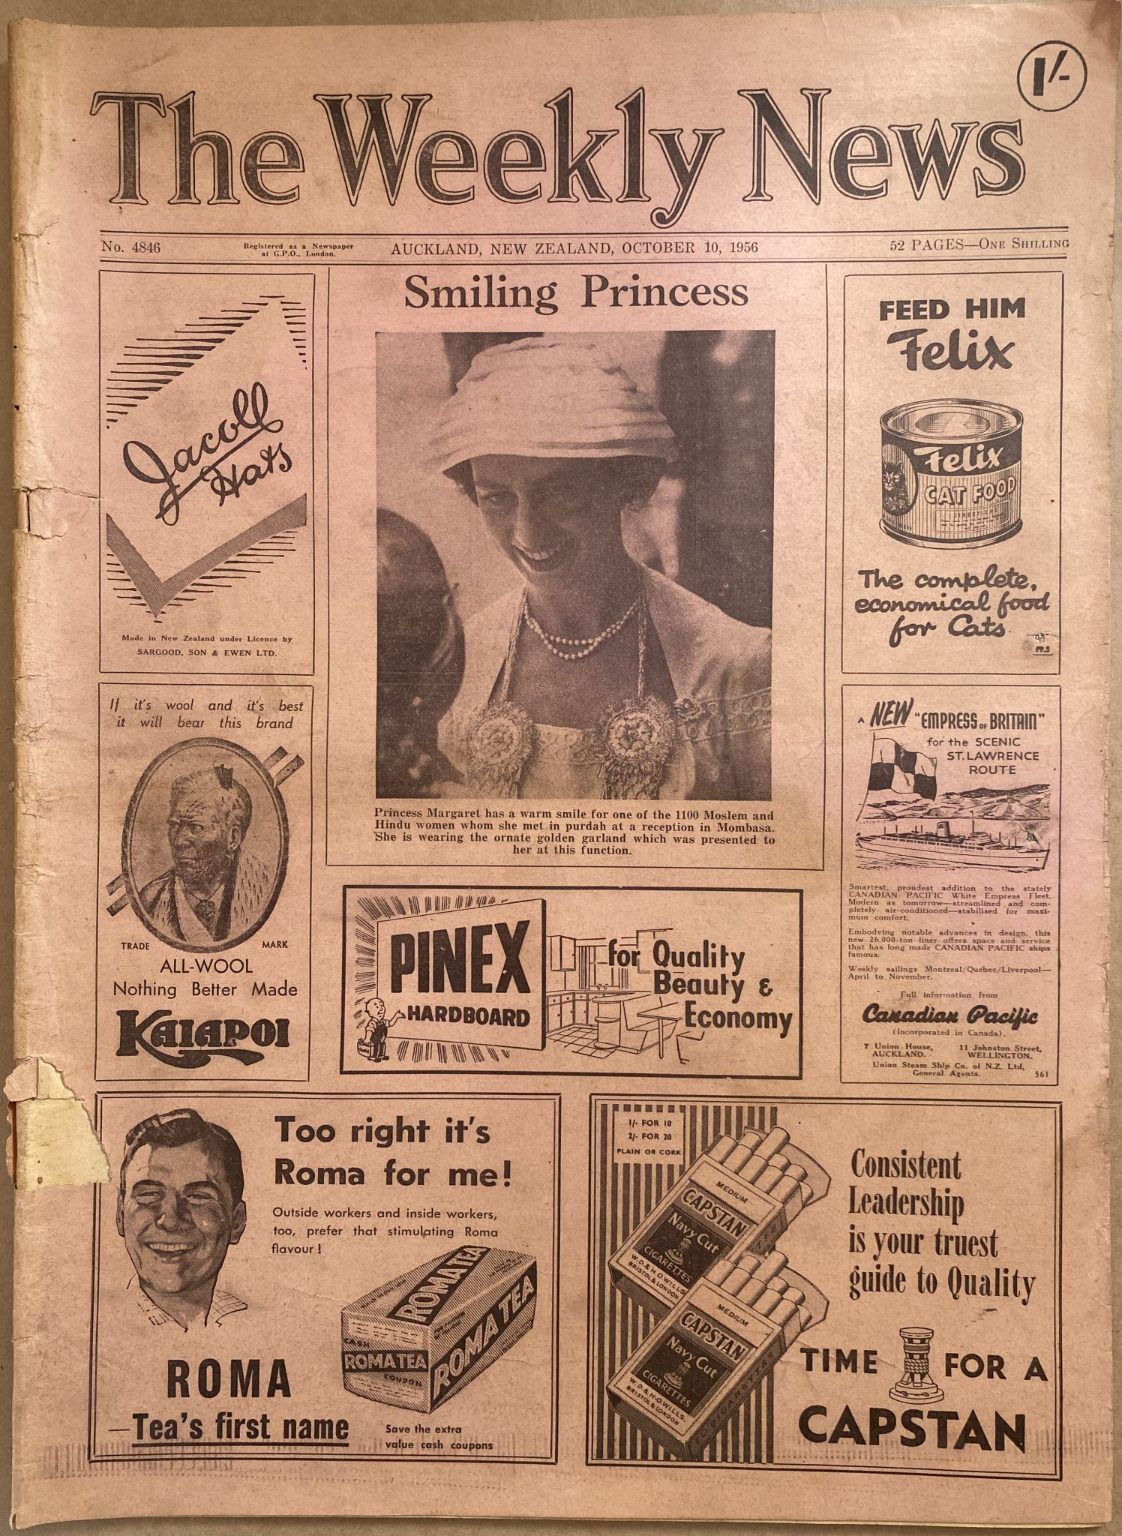 OLD NEWSPAPER: The Weekly News - No. 4846, 10 October 1956